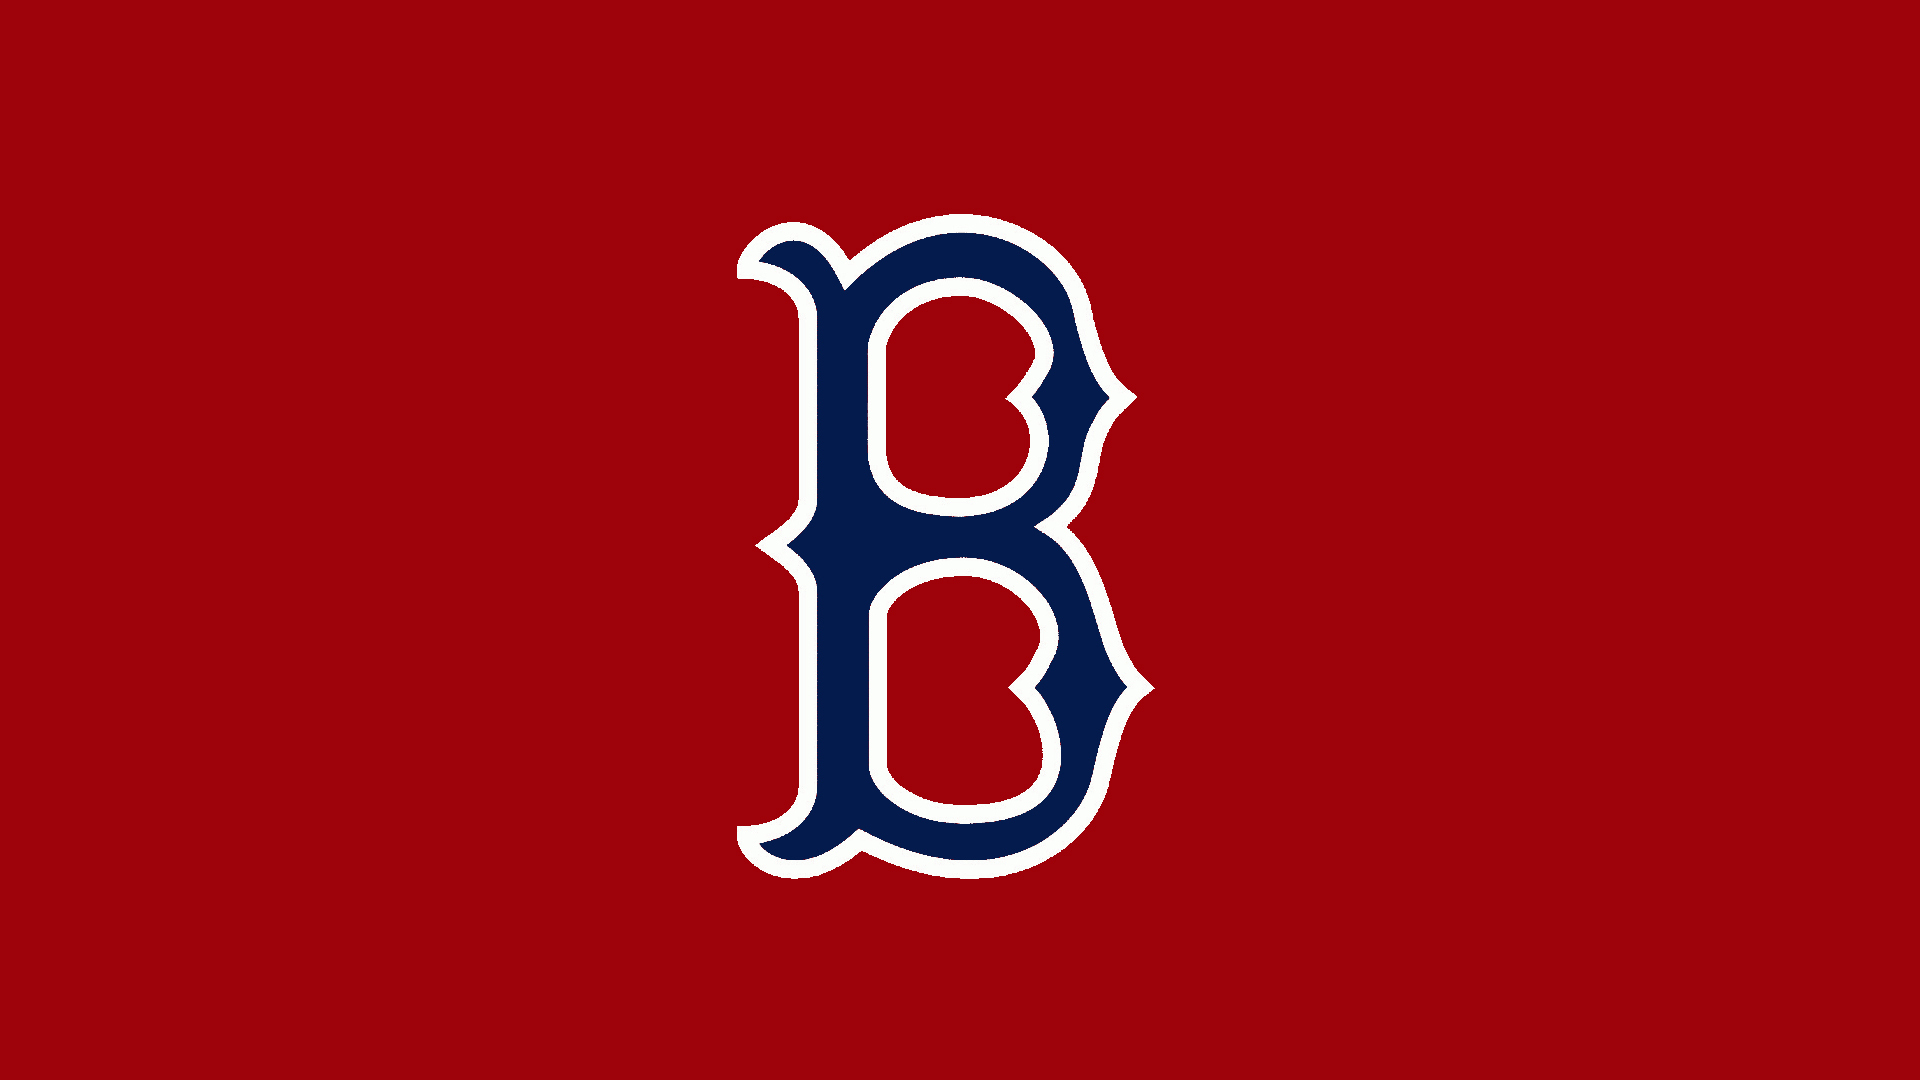 Show Your Team Spirit with Red Sox Download | Downloads